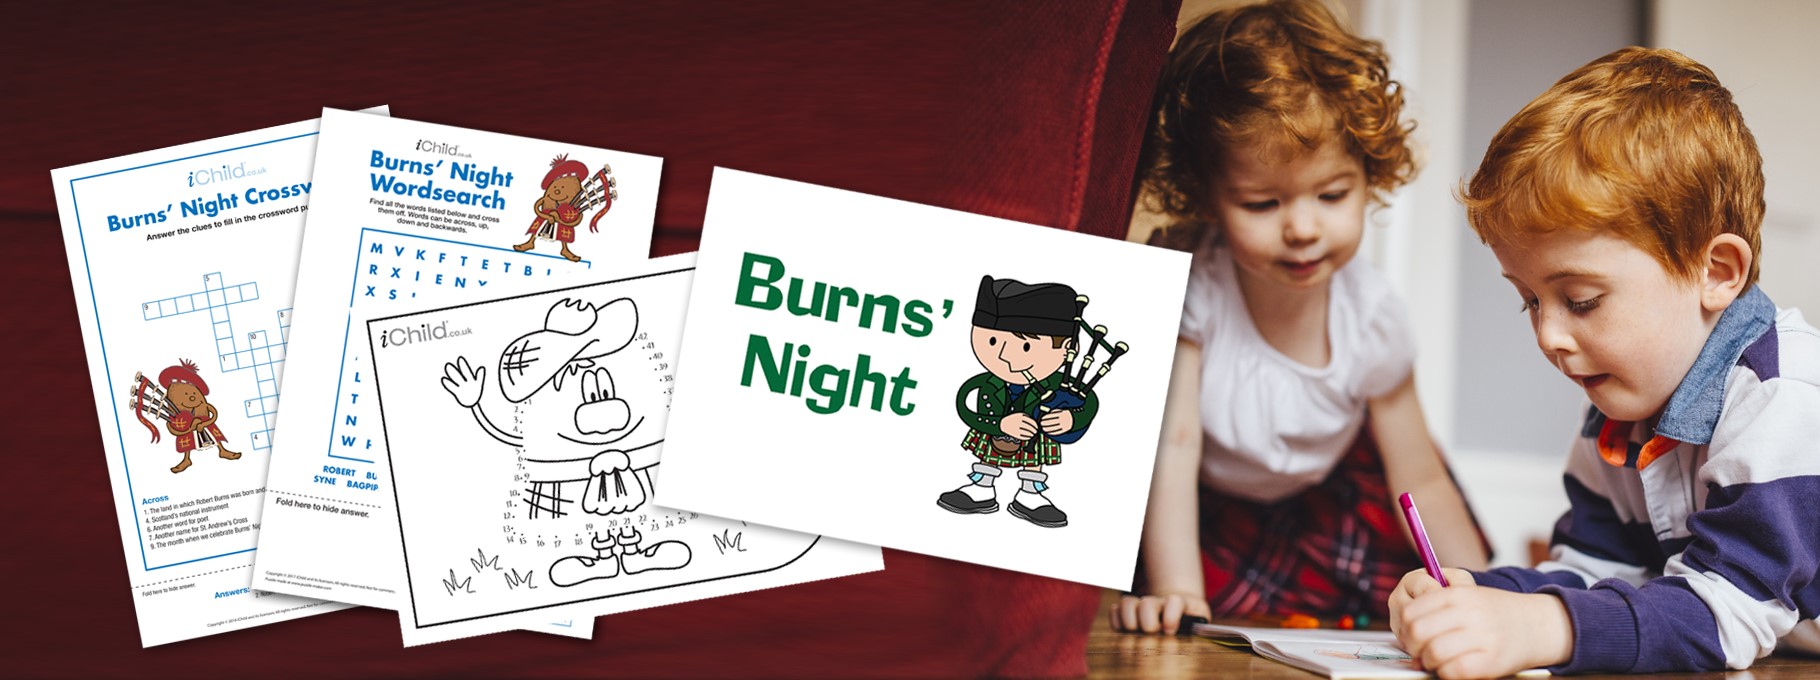 Thumbnail image for the Burns' Night category